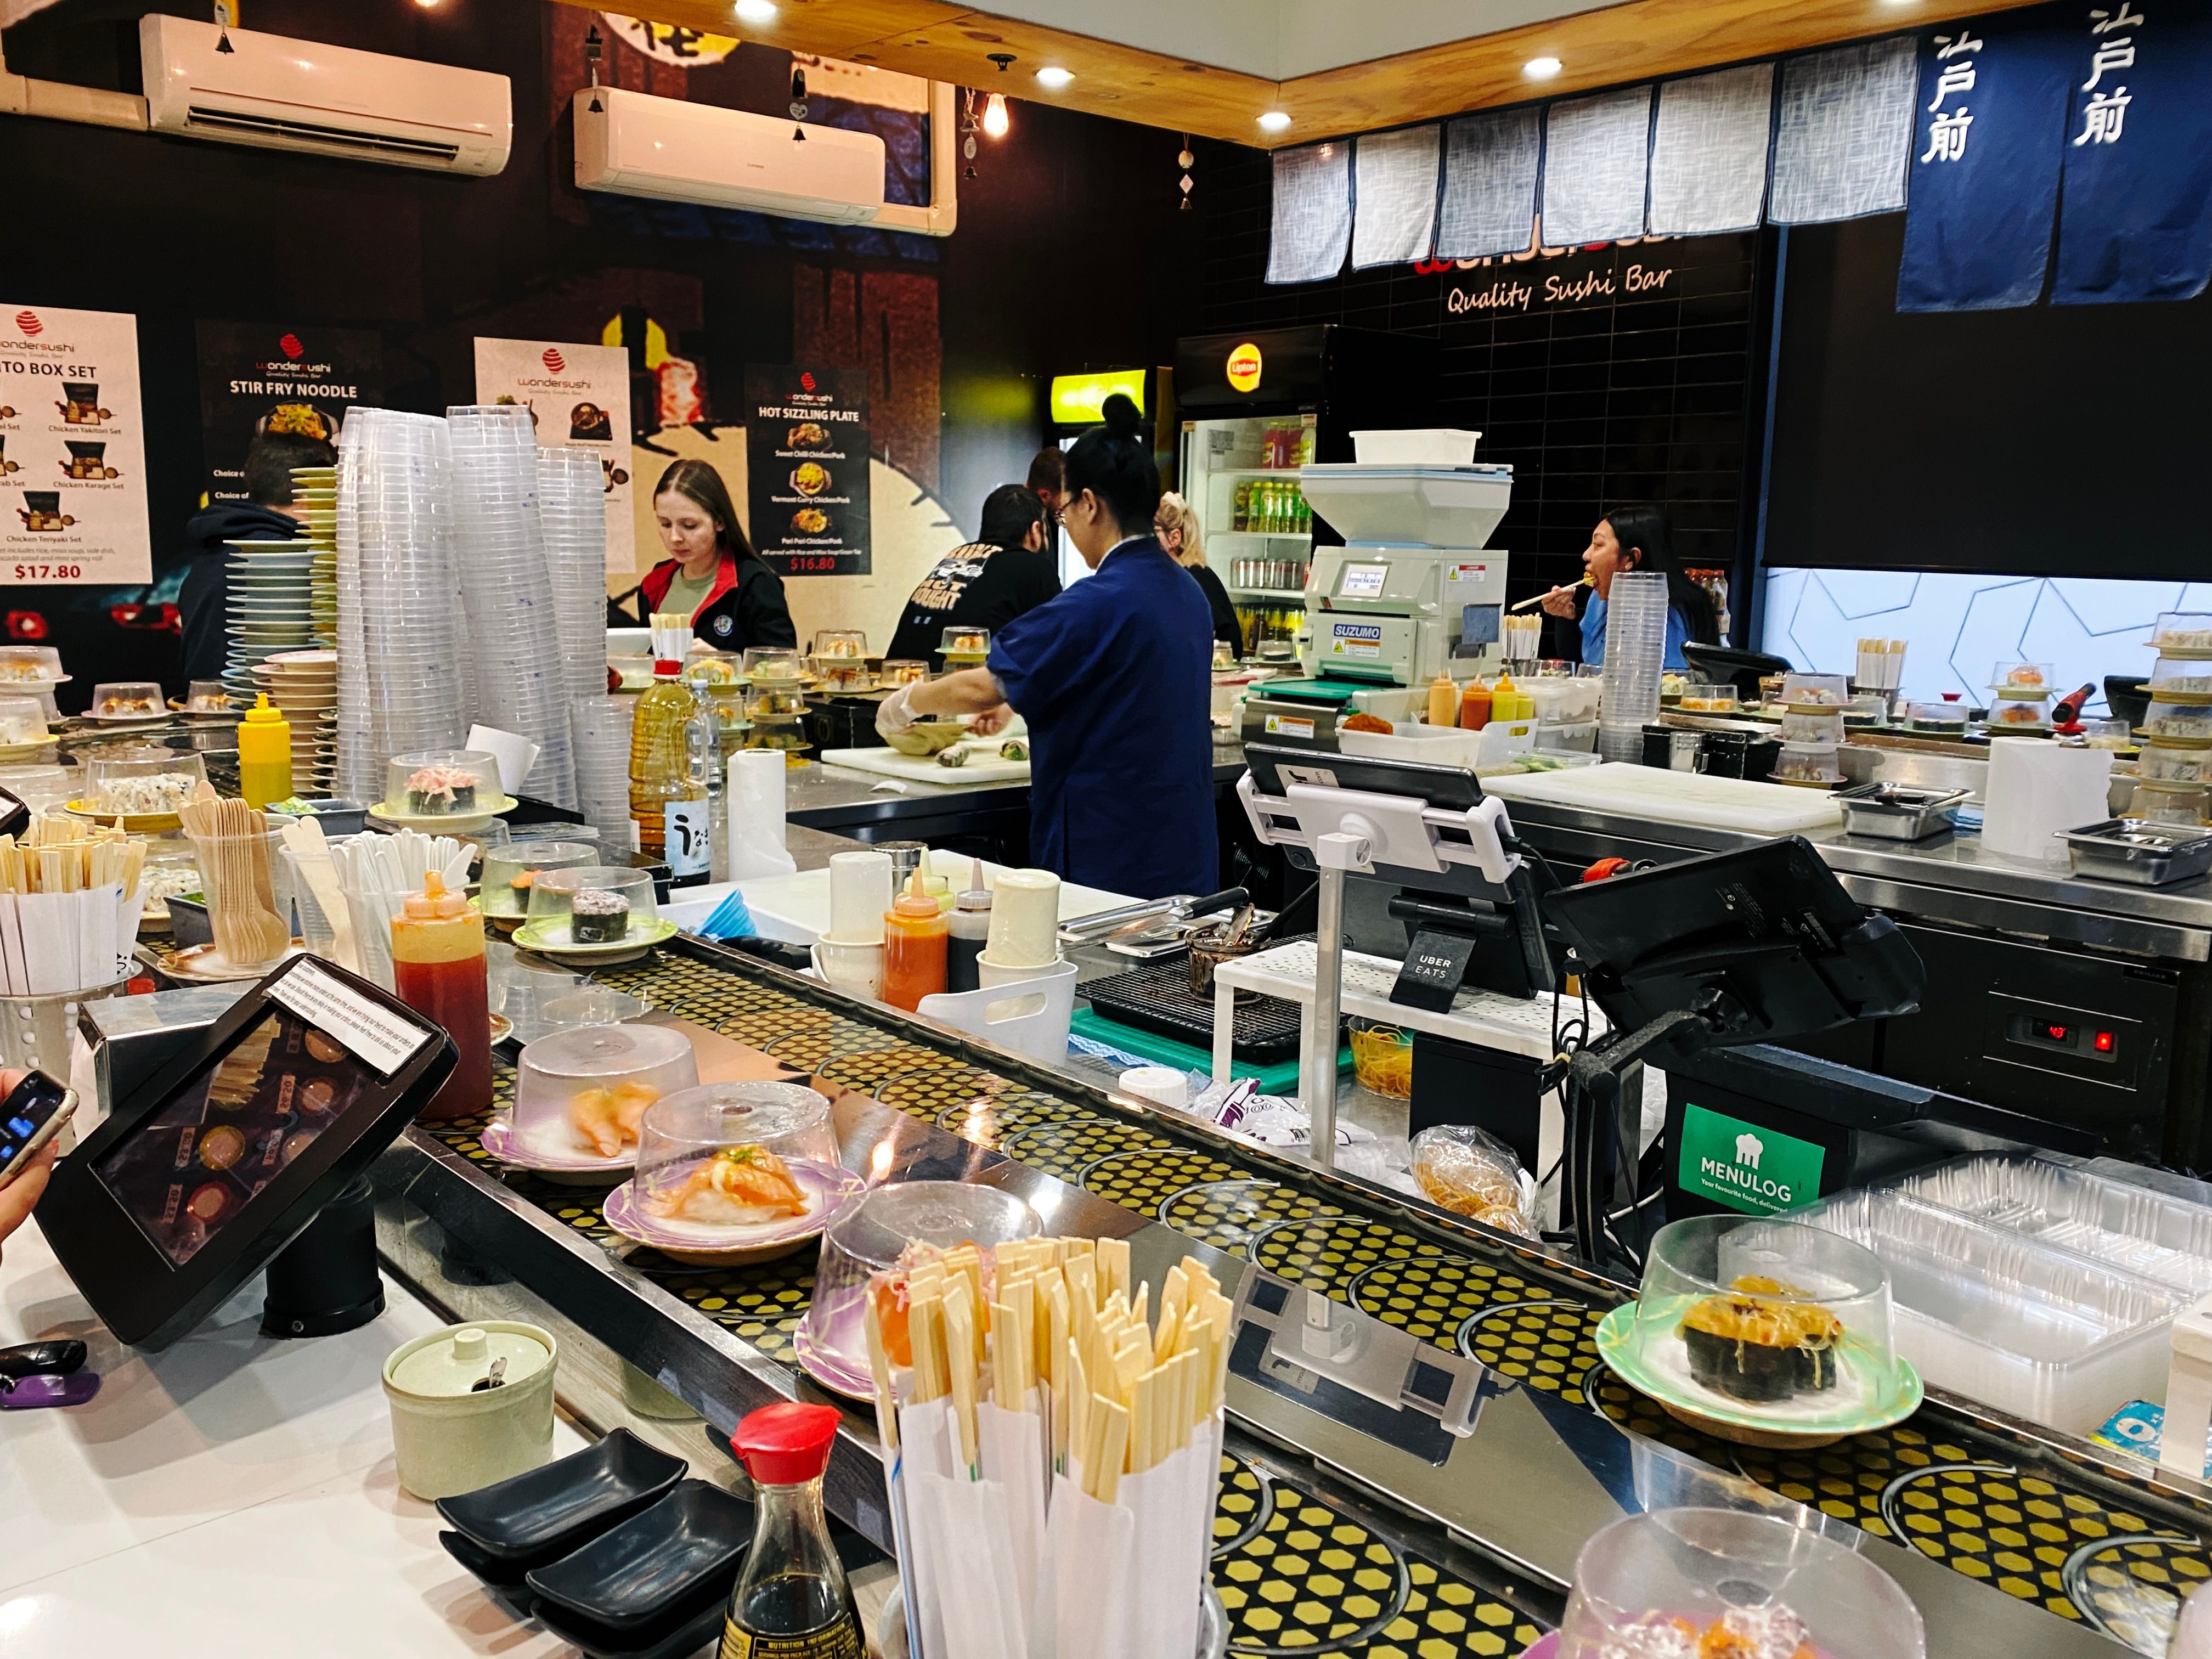 A photo of the inside of a sushi train restaurant with people in the middle making sushi.